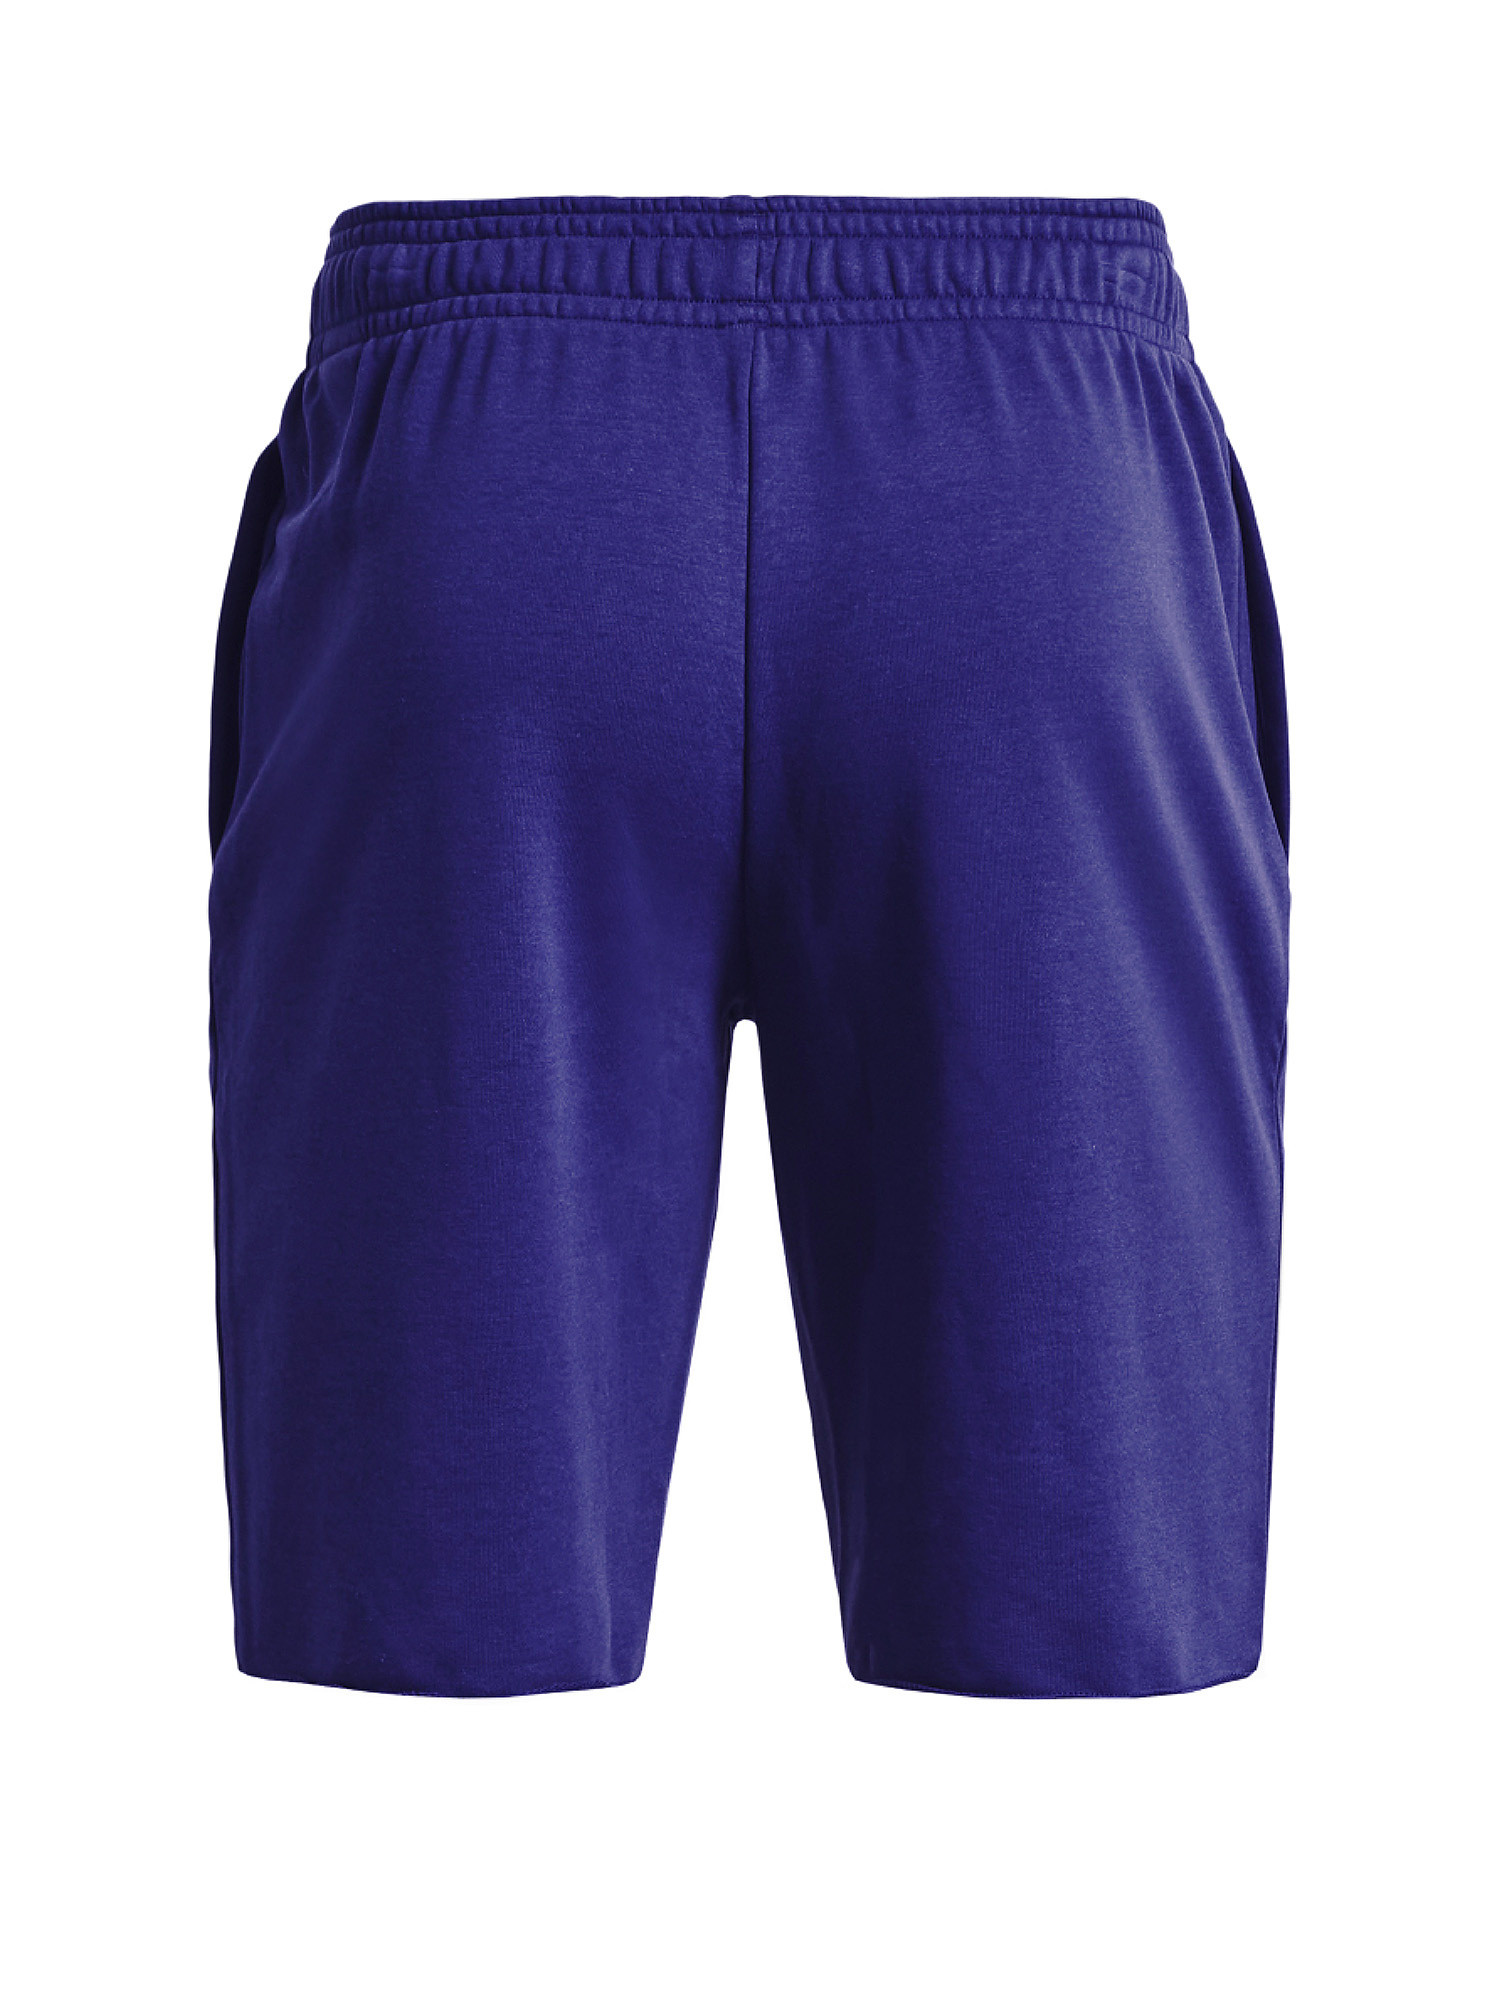 UA Rival Terry Shorts, Royal Blue, large image number 1